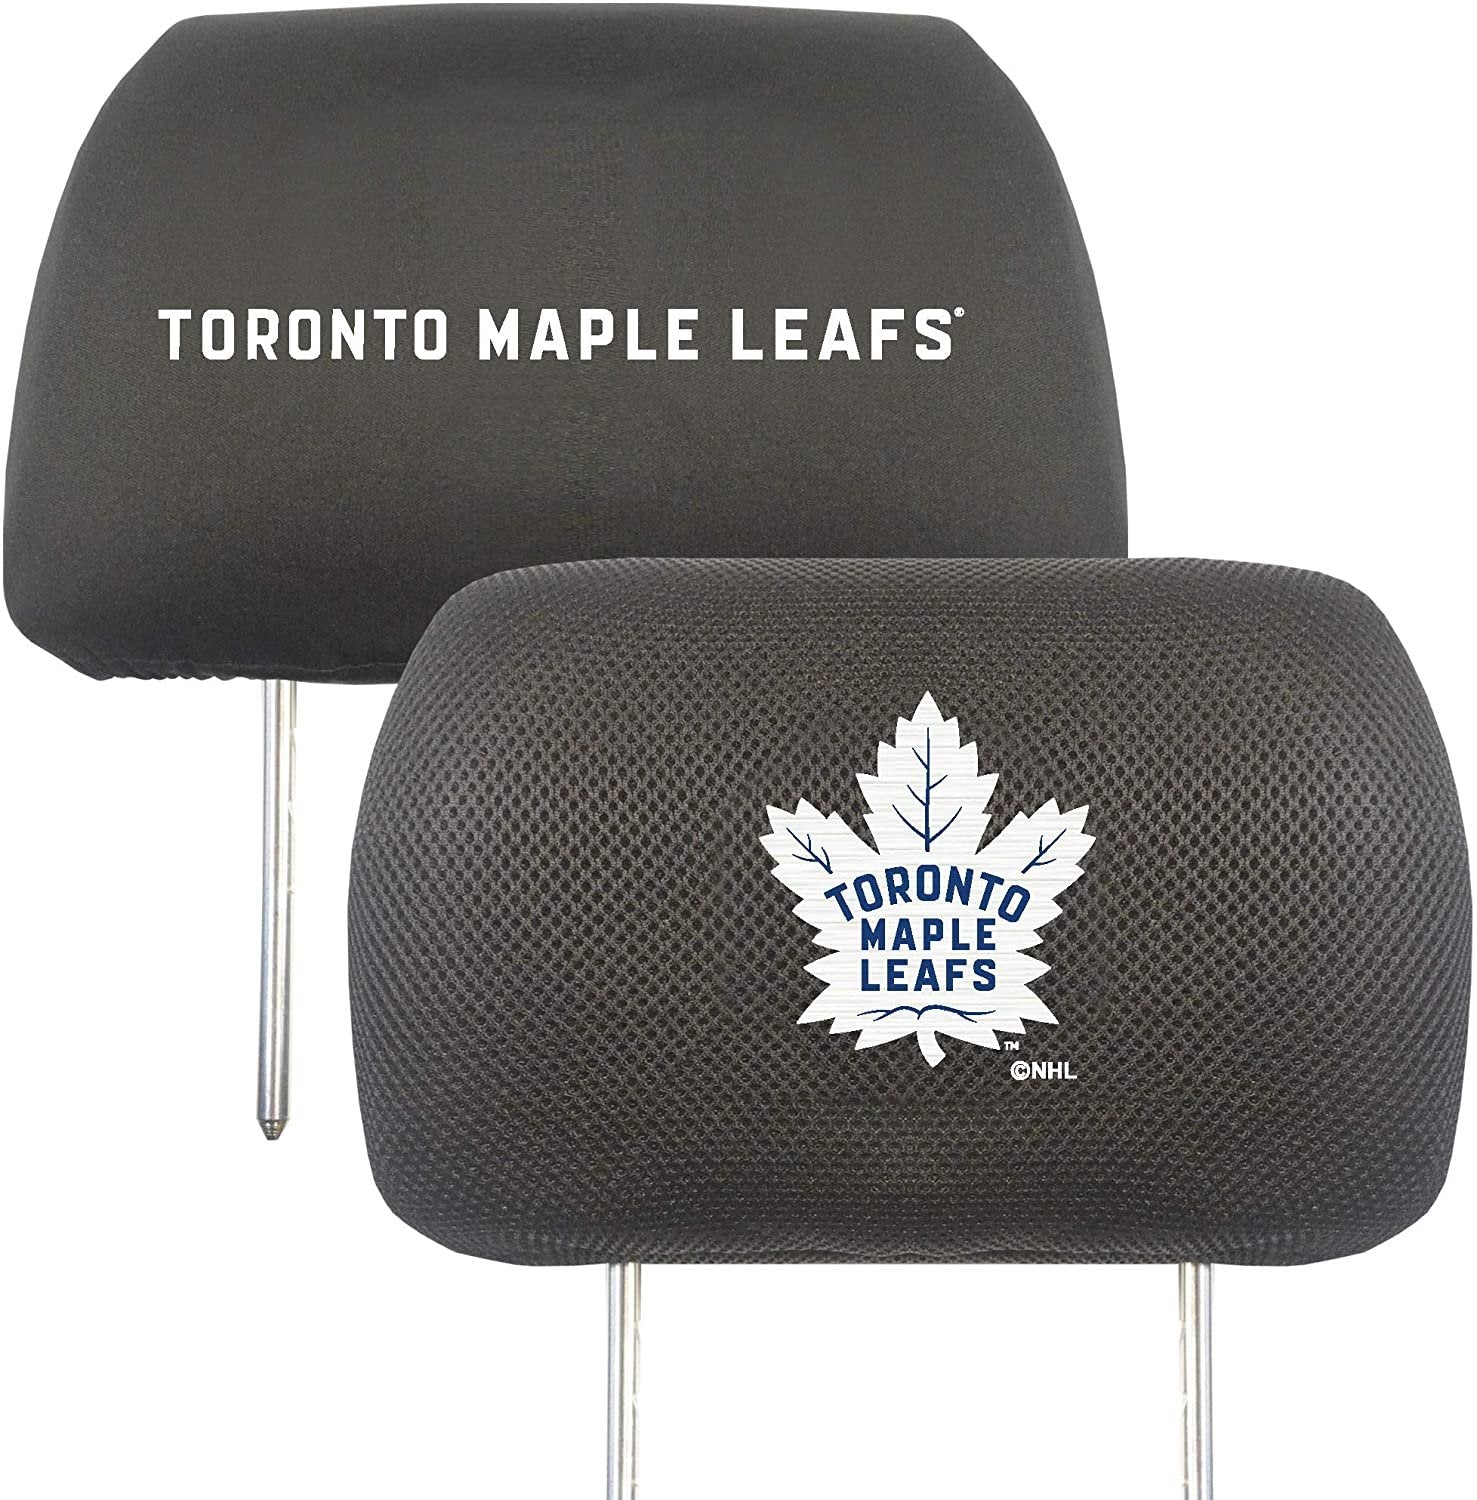 Toronto Maple Leafs Pair of Premium Auto Head Rest Covers, Embroidered, Black Elastic, 14x10 Inch